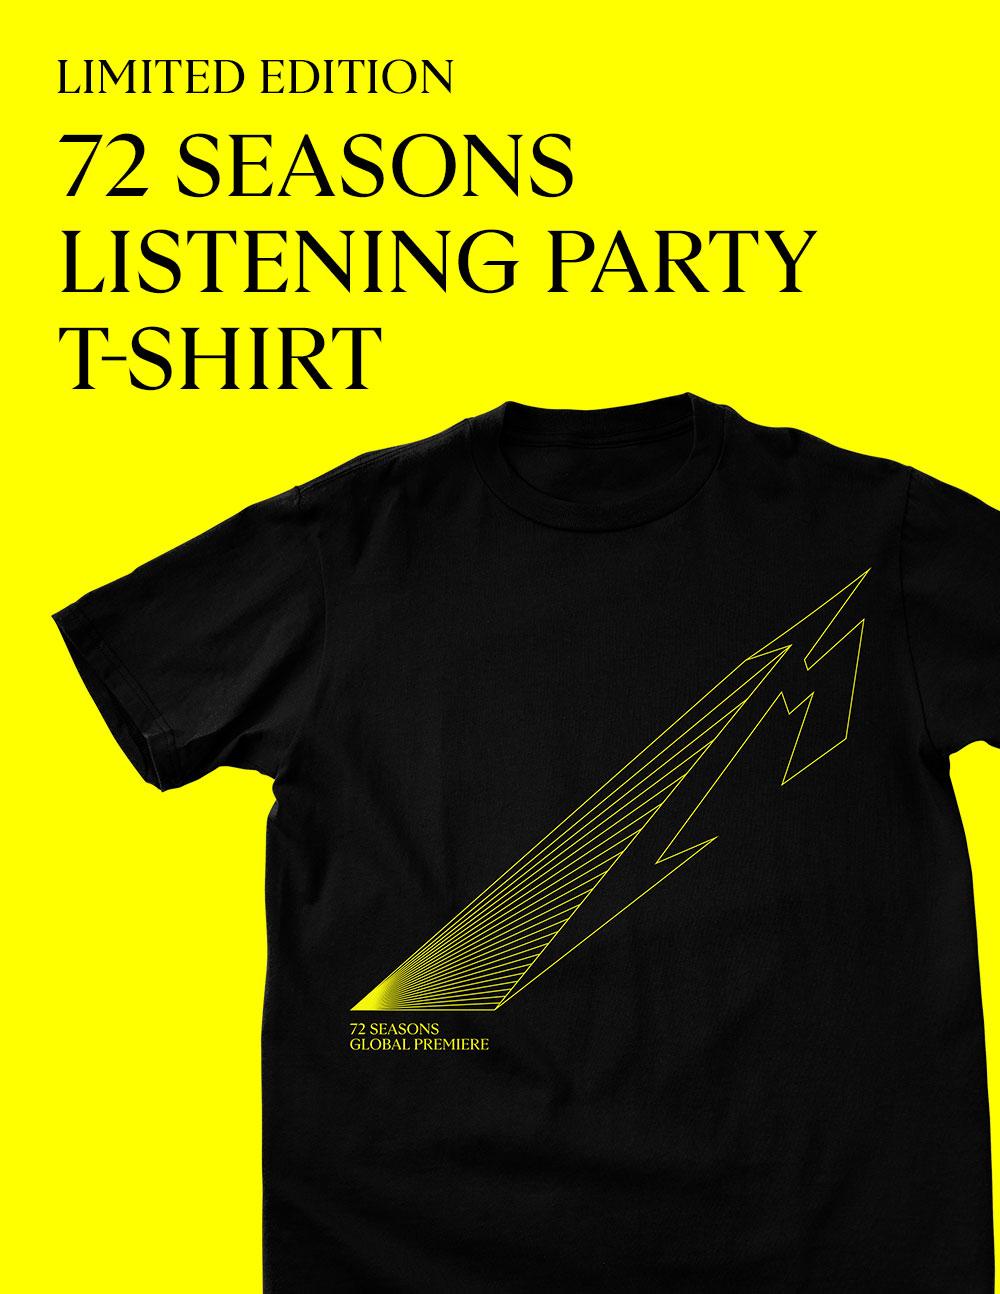 Listening Party T-Shirt